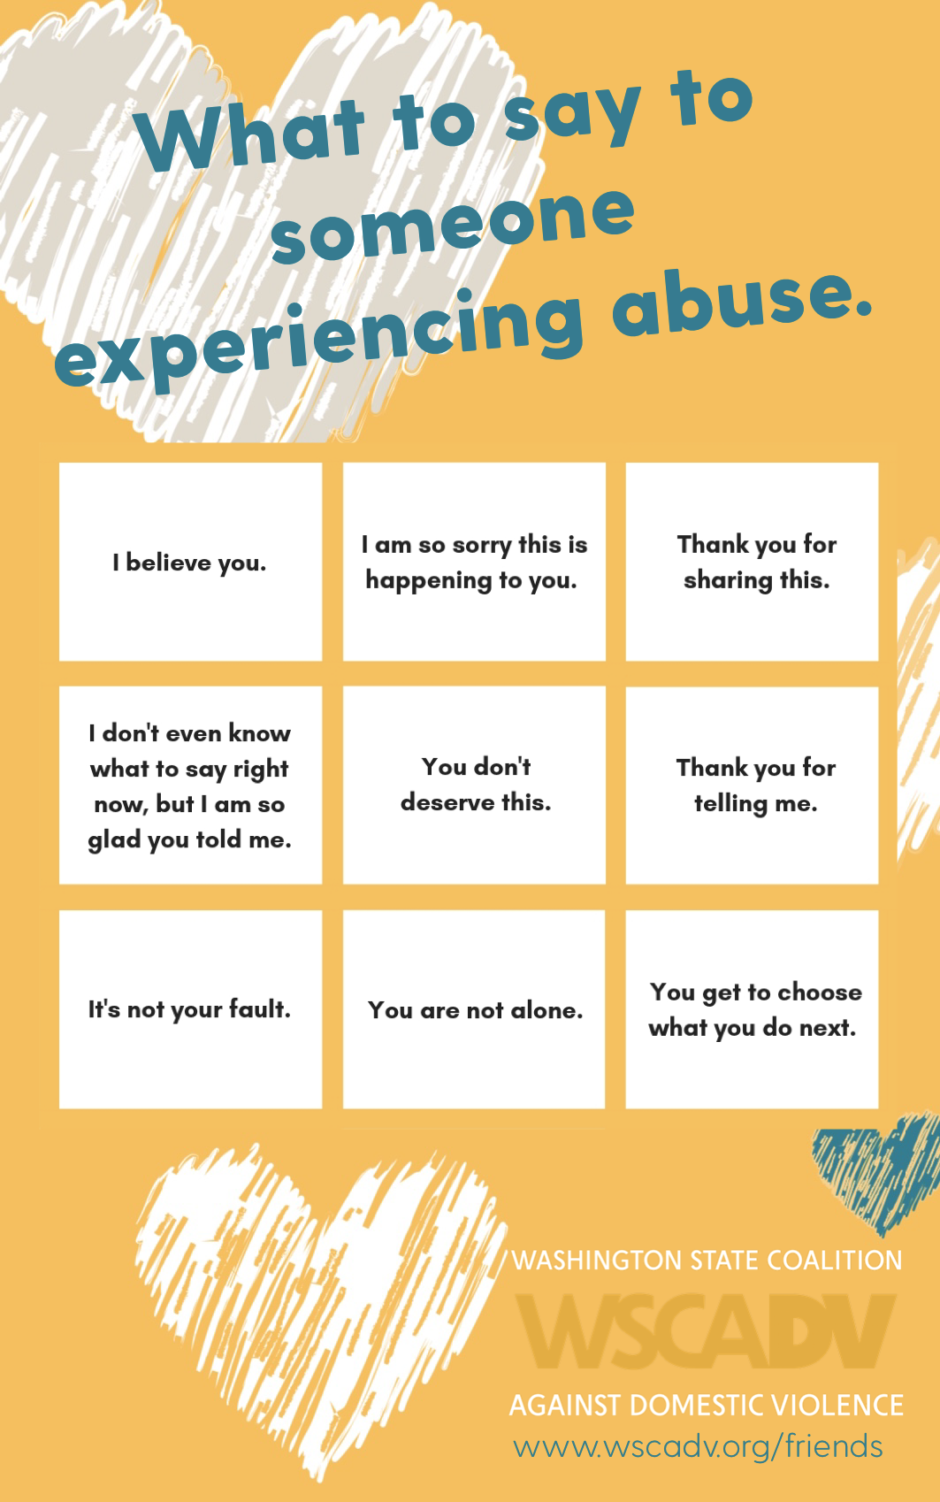 A yellow graphic with the title in blue text: “What to say to someone experiencing abuse.” Underneath the title is a white and yellow grid of nine sample sentences to say to someone that's experiencing domestic violence. The statements are: I believe you; I am so sorry this is happening to you; Thank you for sharing this; I don't even know what to say right now, but I am so glad you told me; You don't deserve this; Thank you for telling me; It's not your fault; You are not alone; You get to choose what you do next.